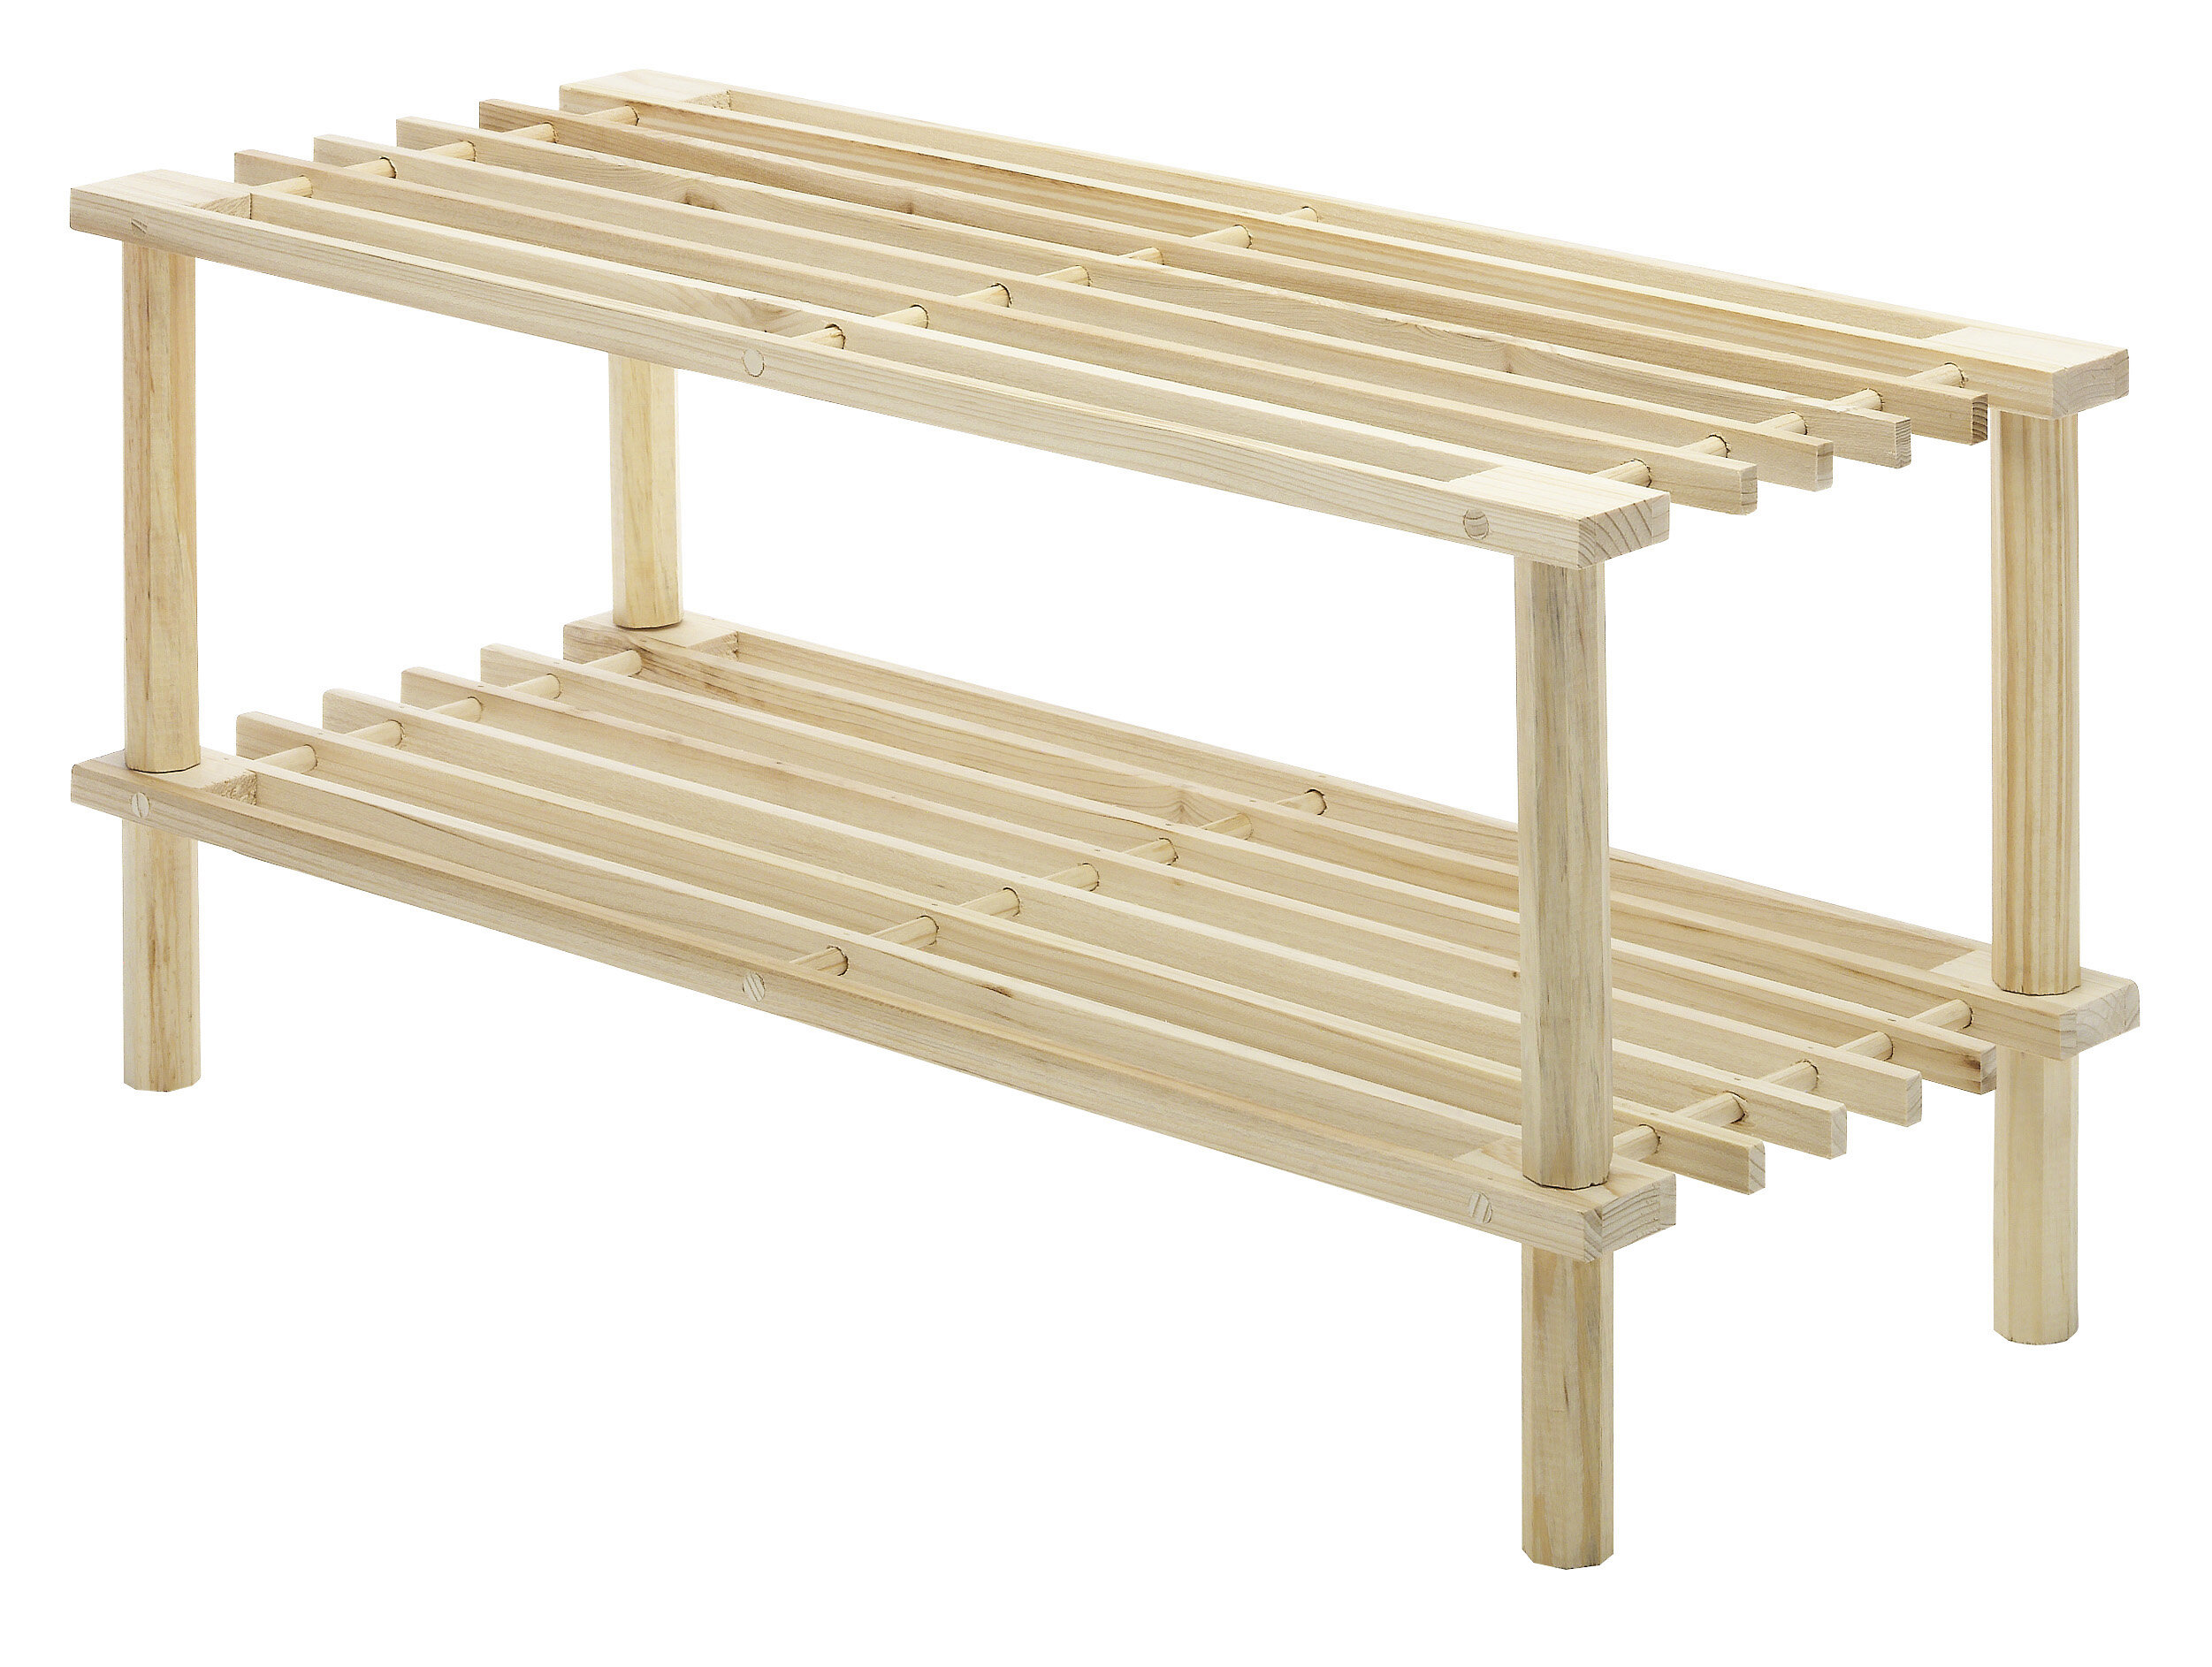 Whitmor 2-Tier, White Expandable and Stackable Shoe Rack